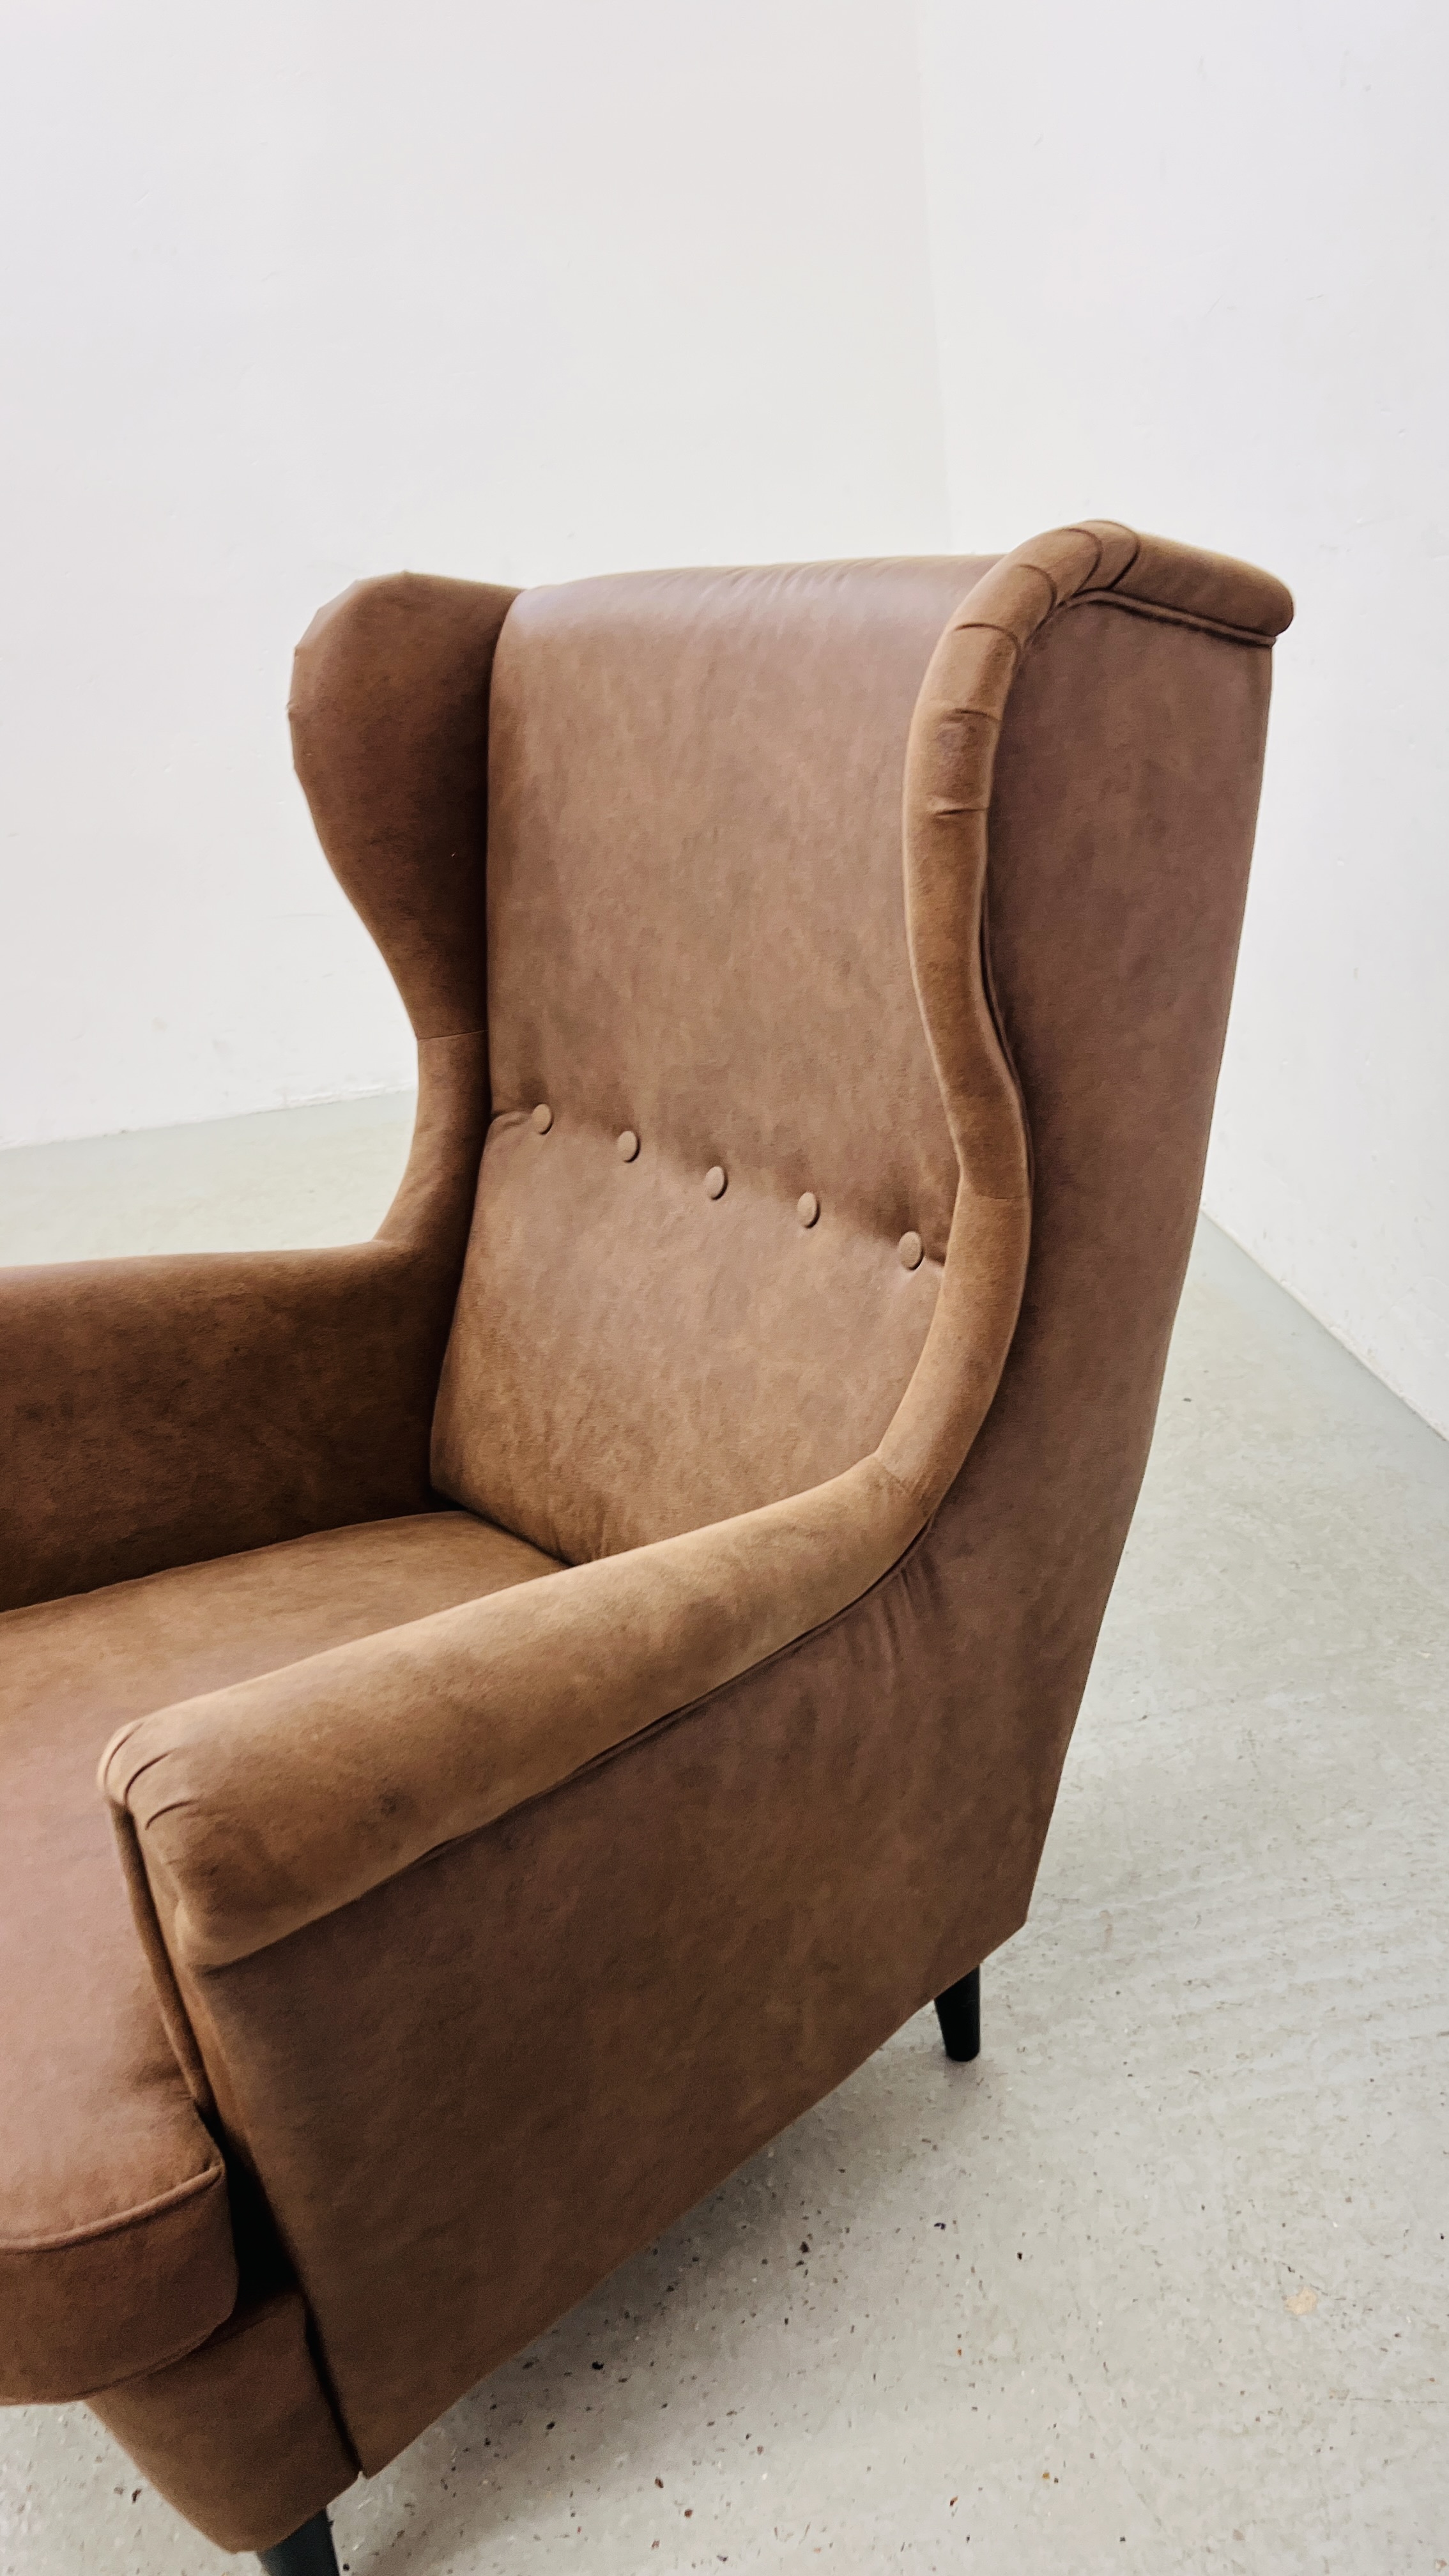 A MODEERN IKEA DESIGNER WINGED ARM CHAIR FAUX BROWN SUEDE UPHOLSTERTY - Image 5 of 7